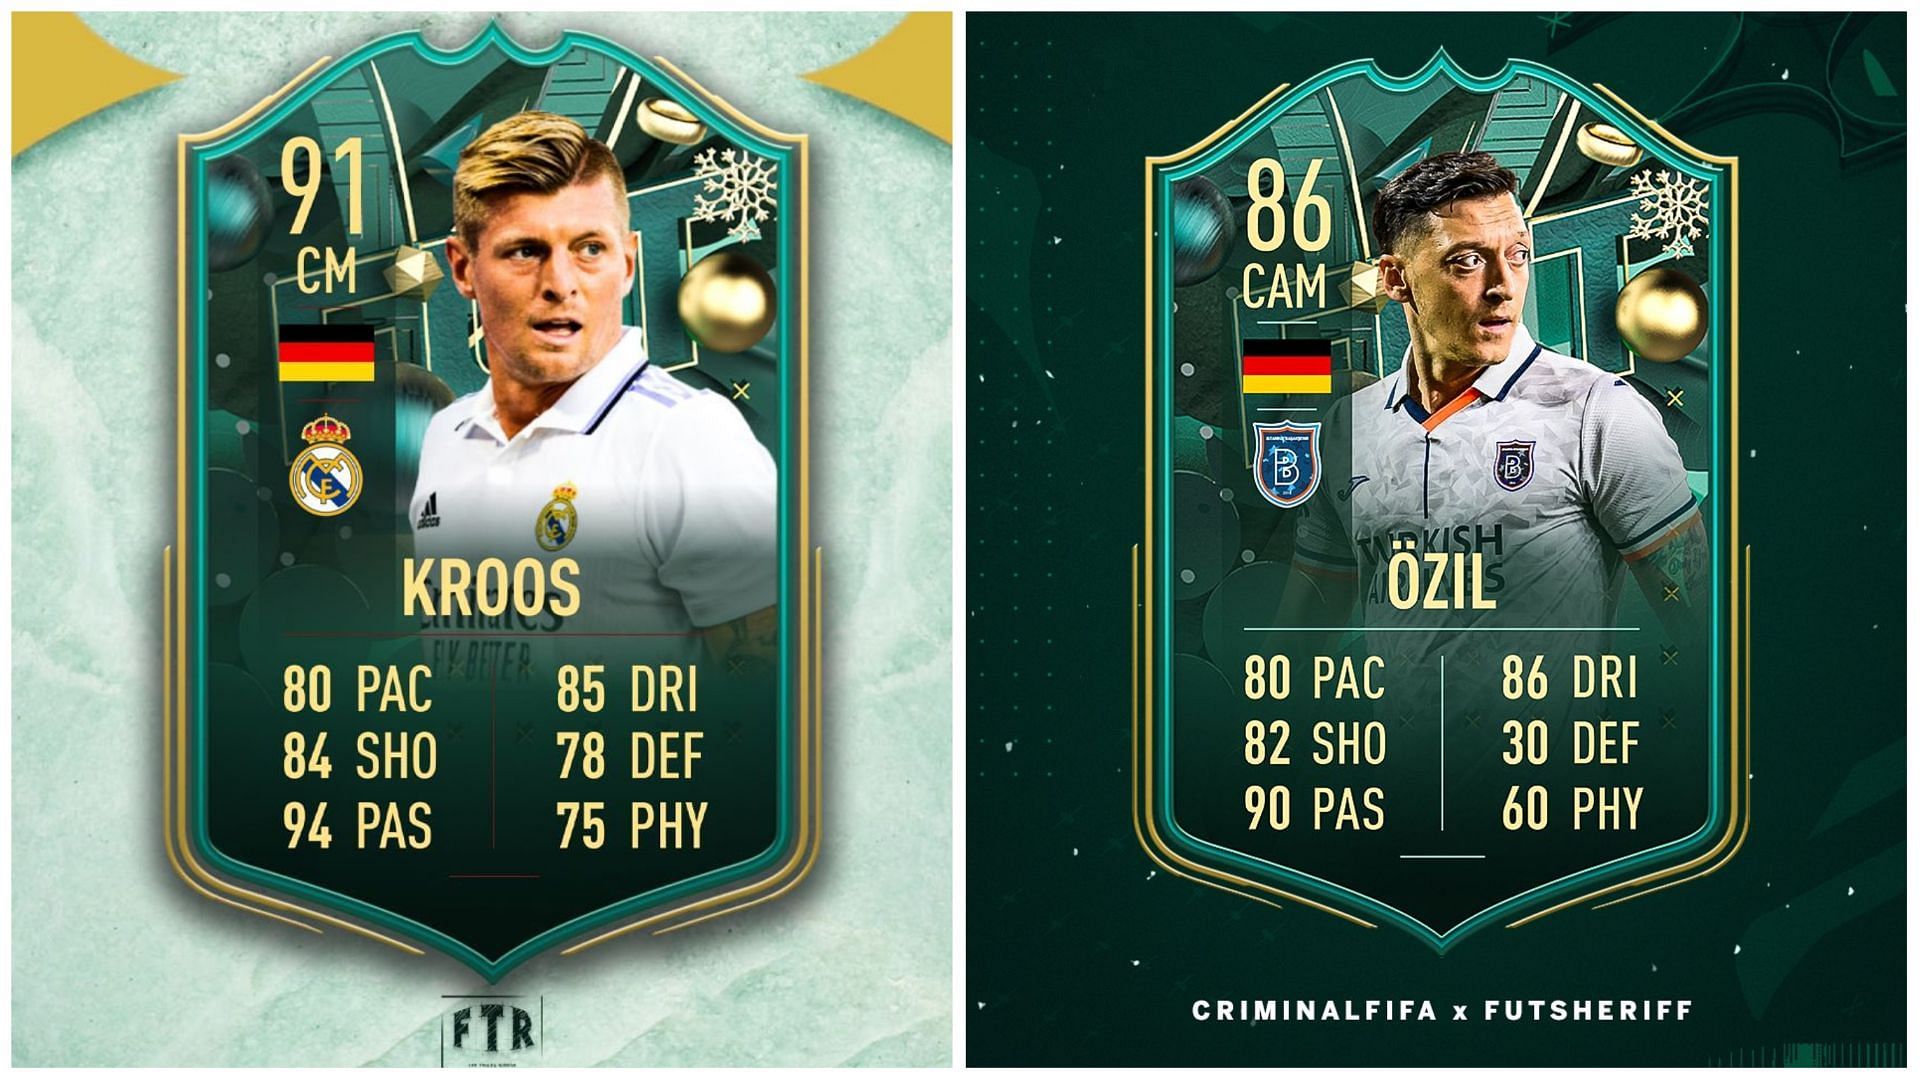 Kroos and Ozil are rumored to arrive as SBCs (Images via Twitter/FIFATradingRomania and Twitter/FUT Sheriff)